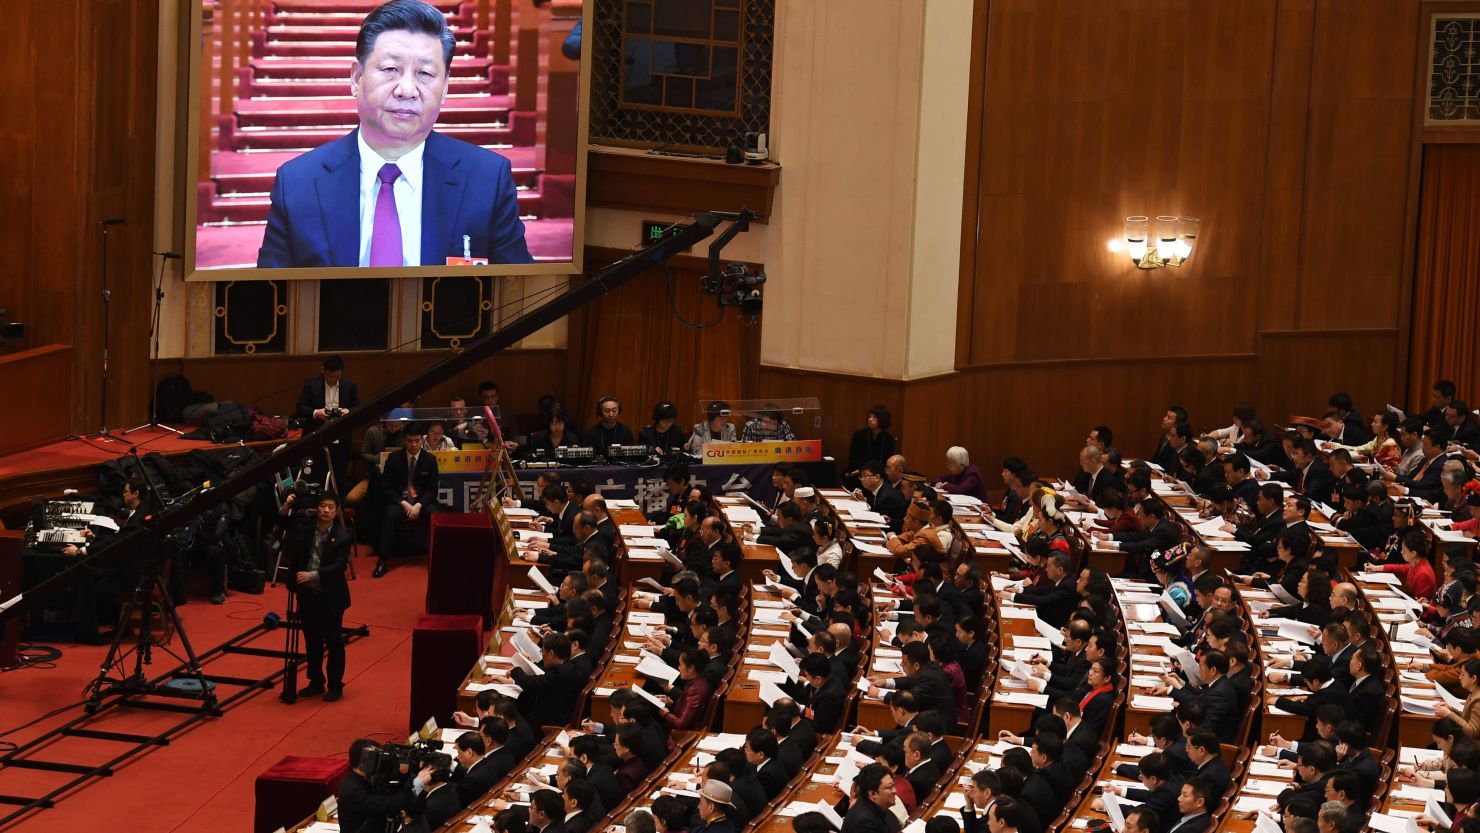 A live image of Chinese President Xi Jinping is seen on a screen above delegates during the opening session of the National People's Congress in the Great Hall of the People in Beijing on March 5, 2018.